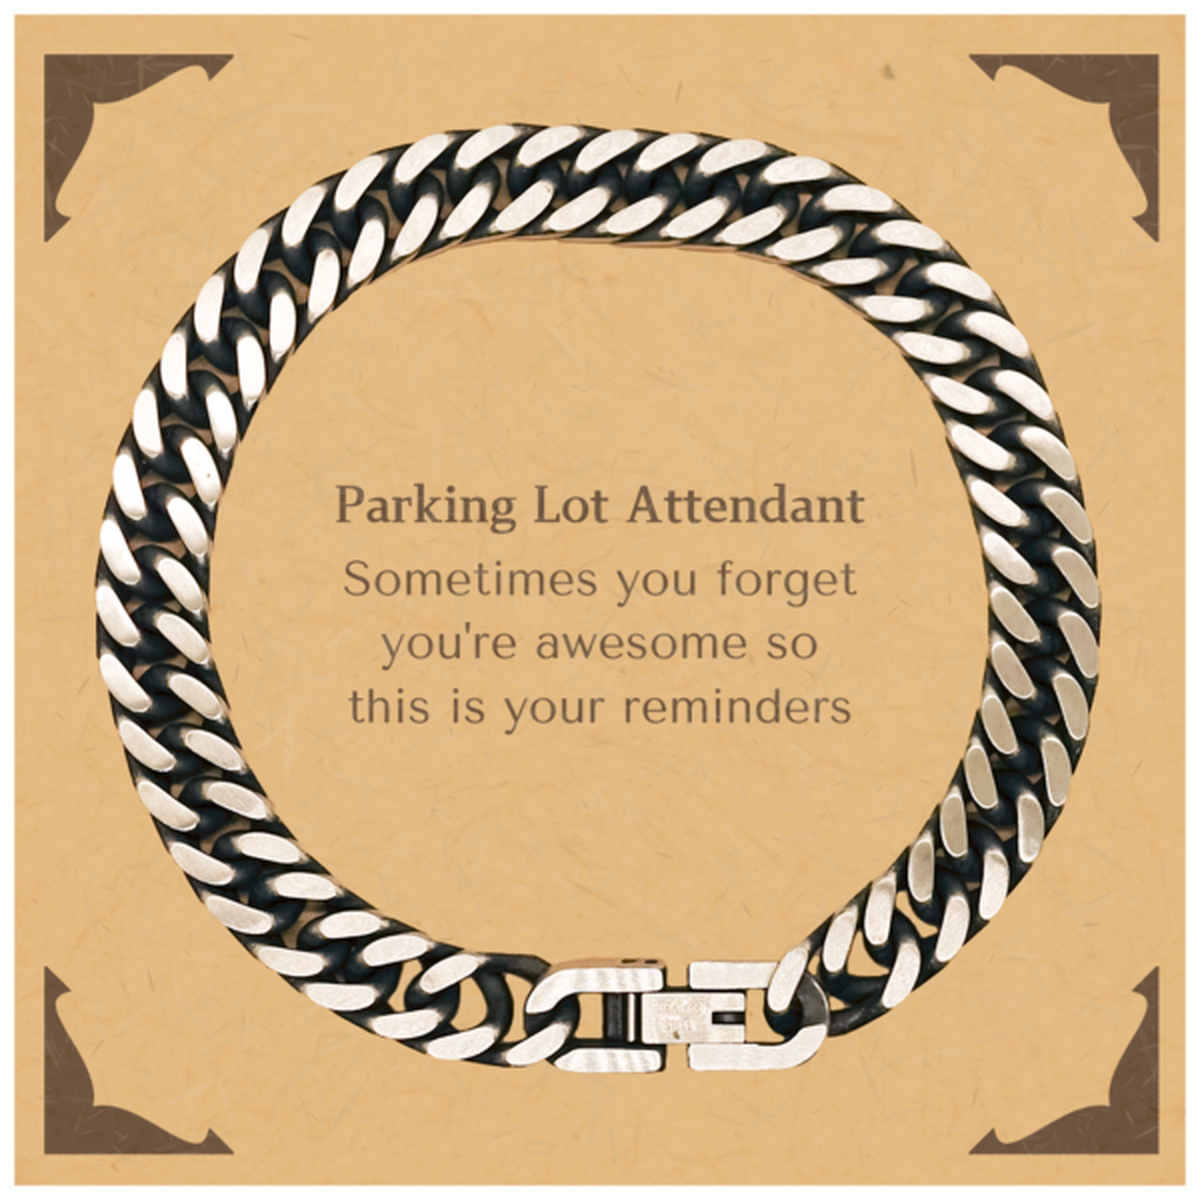 Sentimental Parking Lot Attendant Cuban Link Chain Bracelet, Parking Lot Attendant Sometimes you forget you're awesome so this is your reminders, Graduation Christmas Birthday Gifts for Parking Lot Attendant, Men, Women, Coworkers